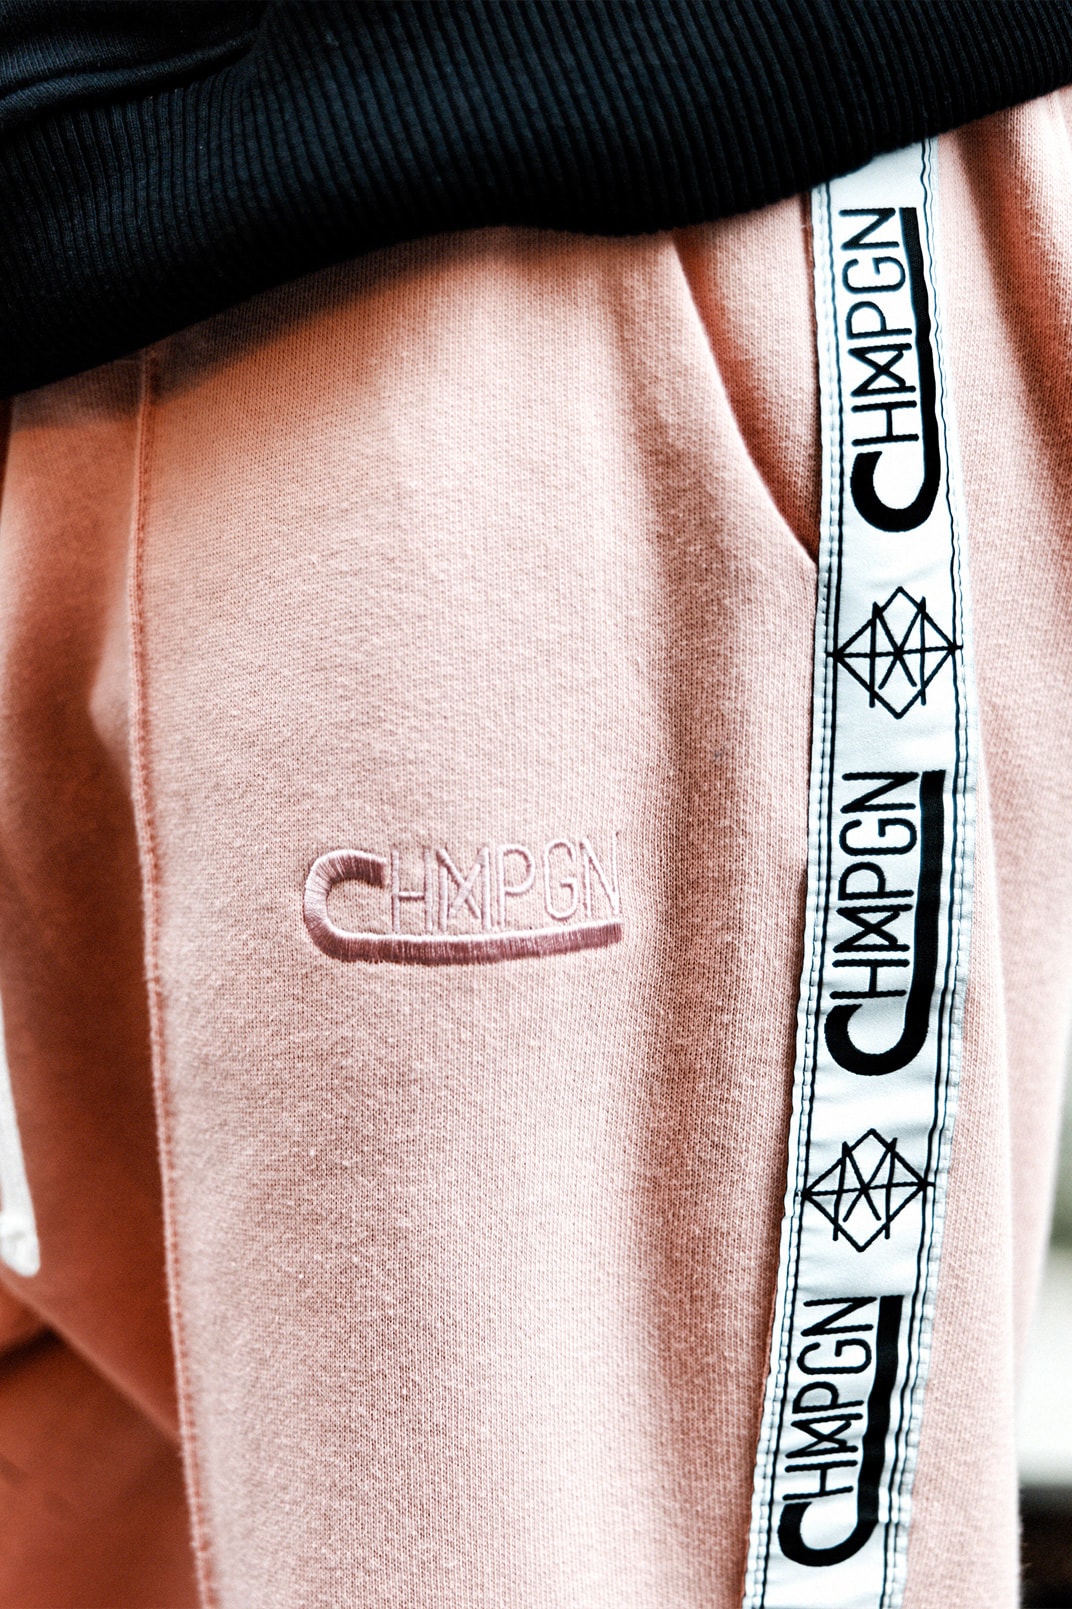 CHMPGN and Caliroots 2017 fall winter lookbook